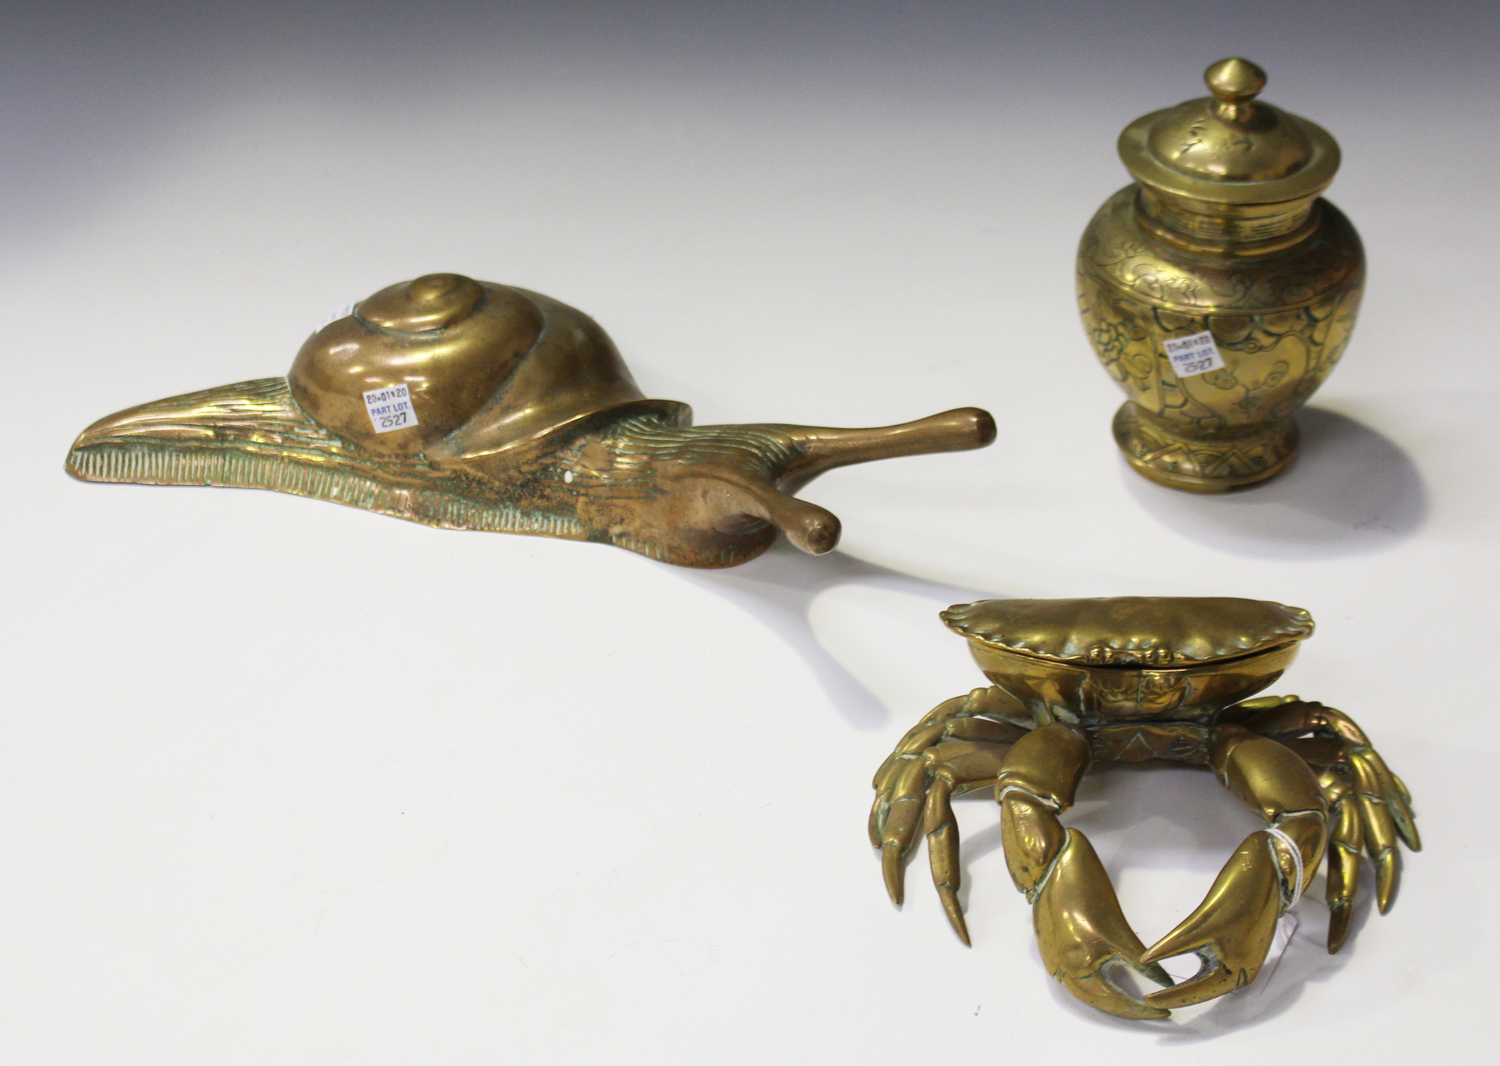 A 20th century cast brass box in the form of a crab, width 18cm, together with a cast brass model of